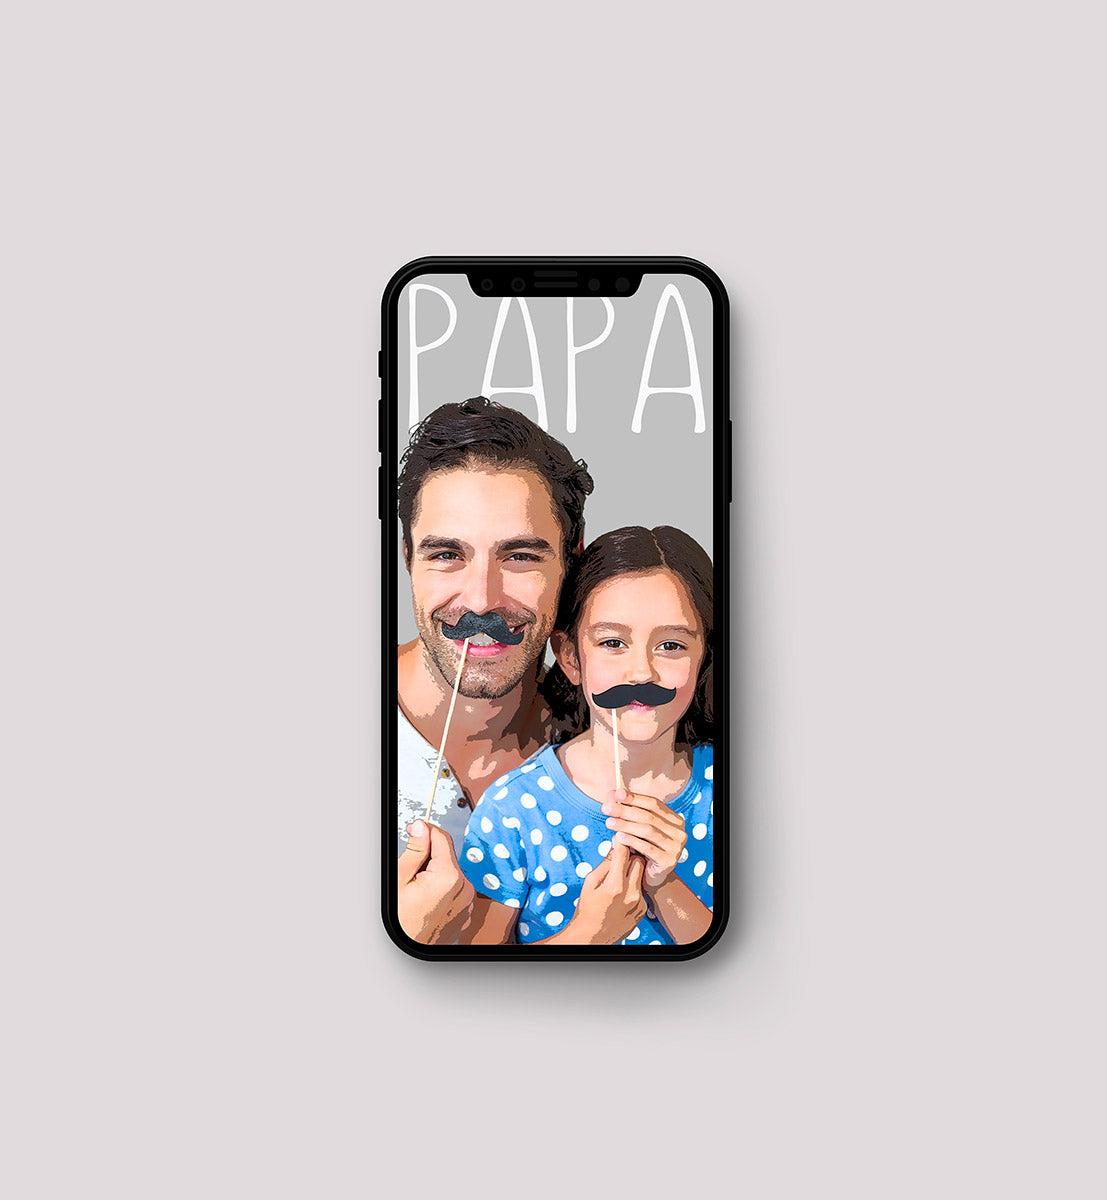 Pop art of dad and daughter on iPhoneX